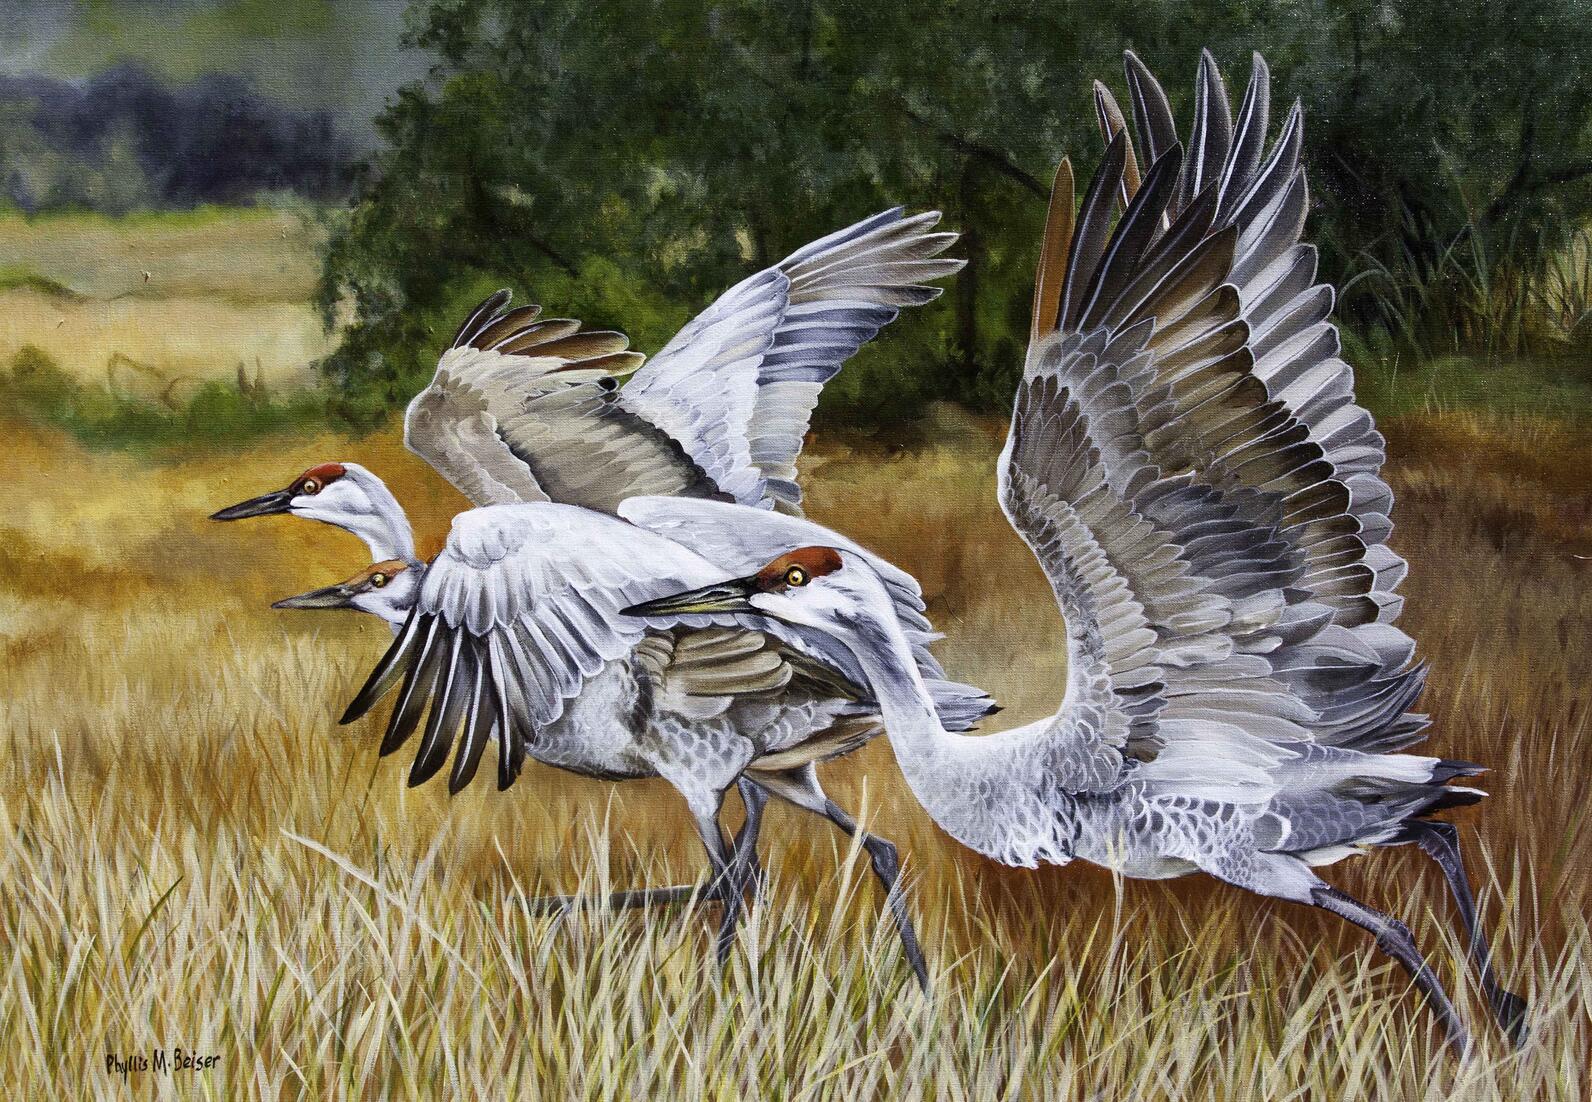 A painting of three sandhill cranes about to take flight, by Phyliss Beiser.